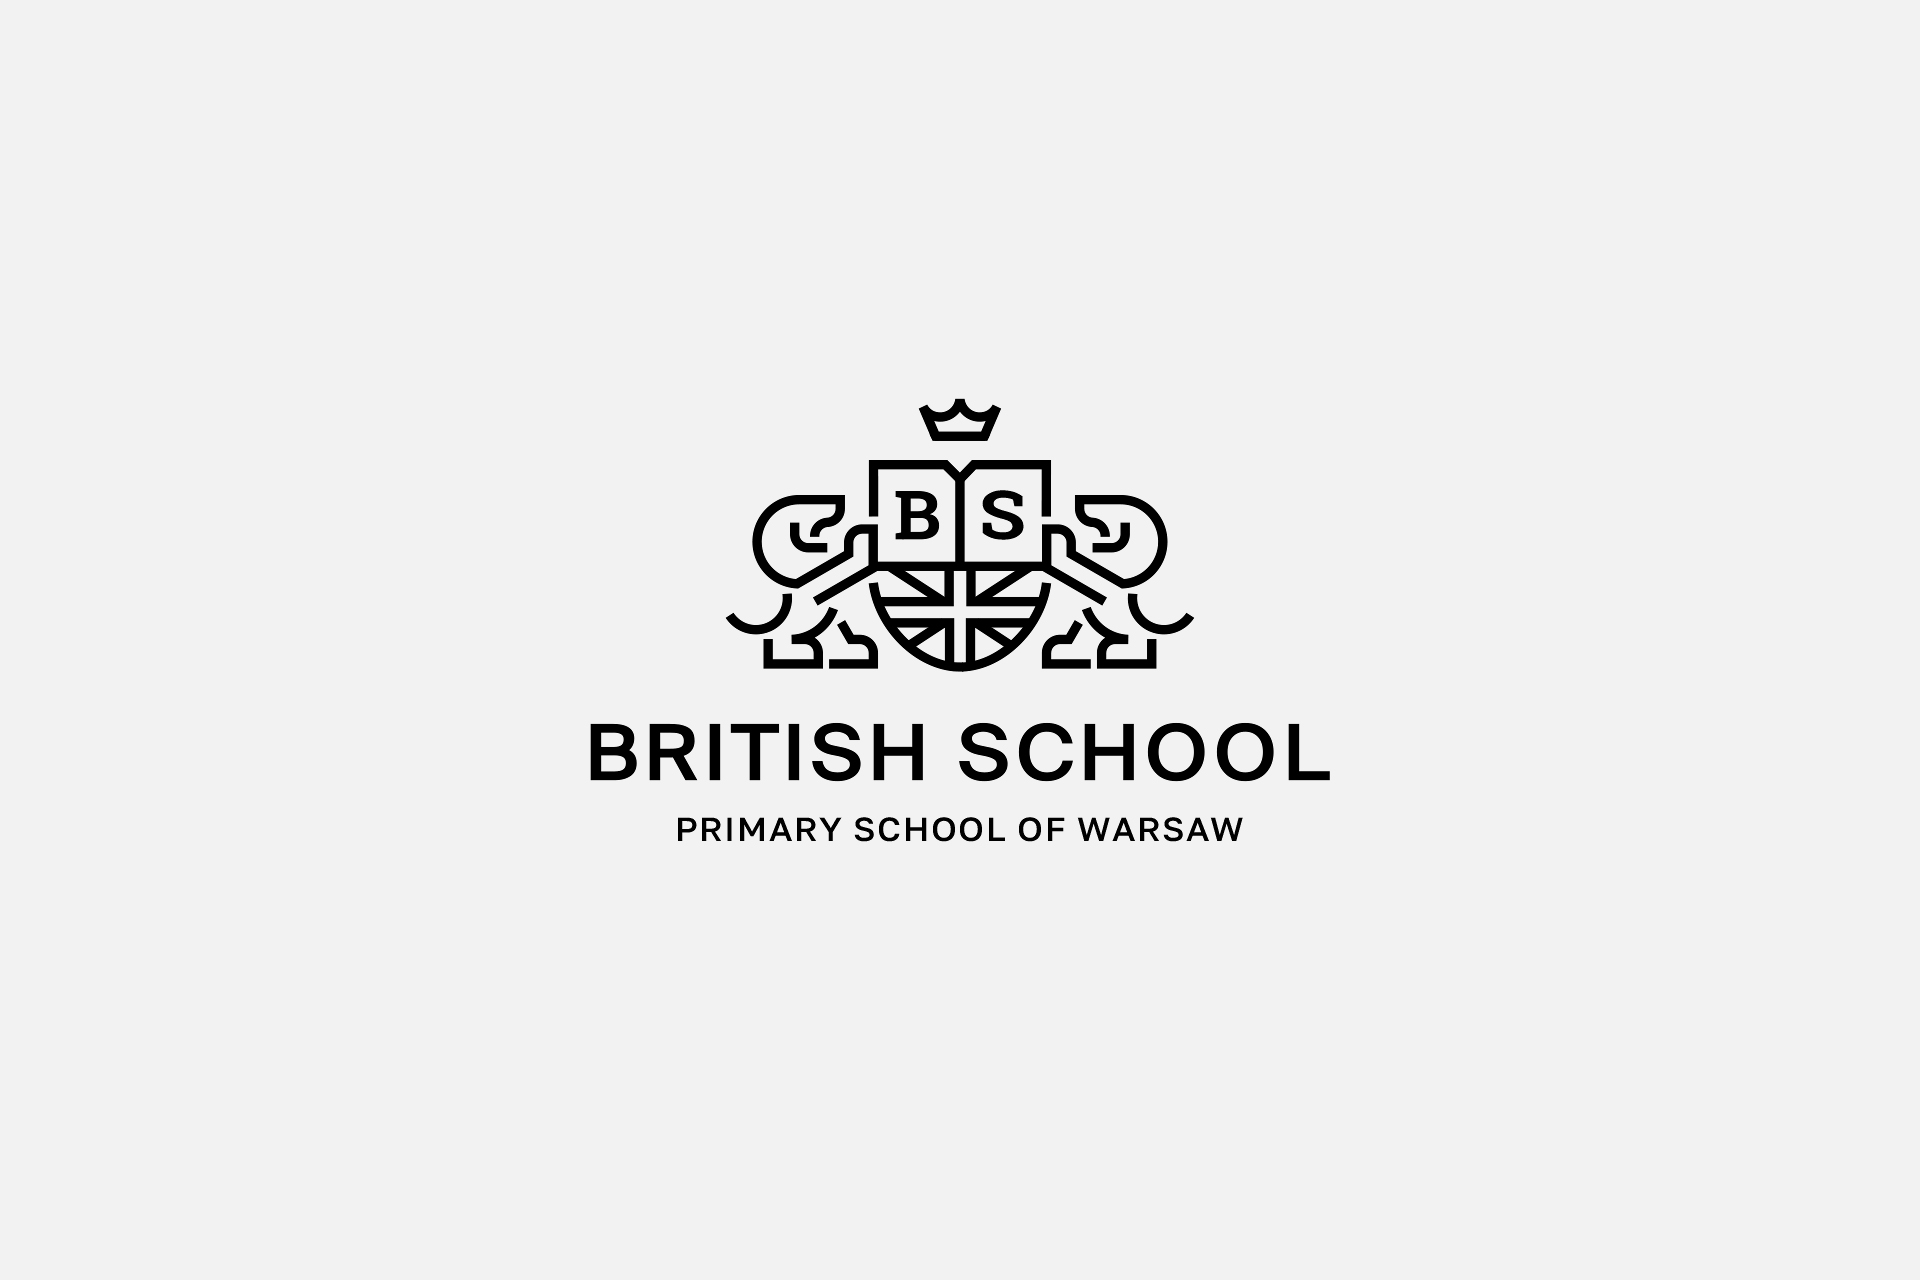 Logo of the British Primary School in Warsaw